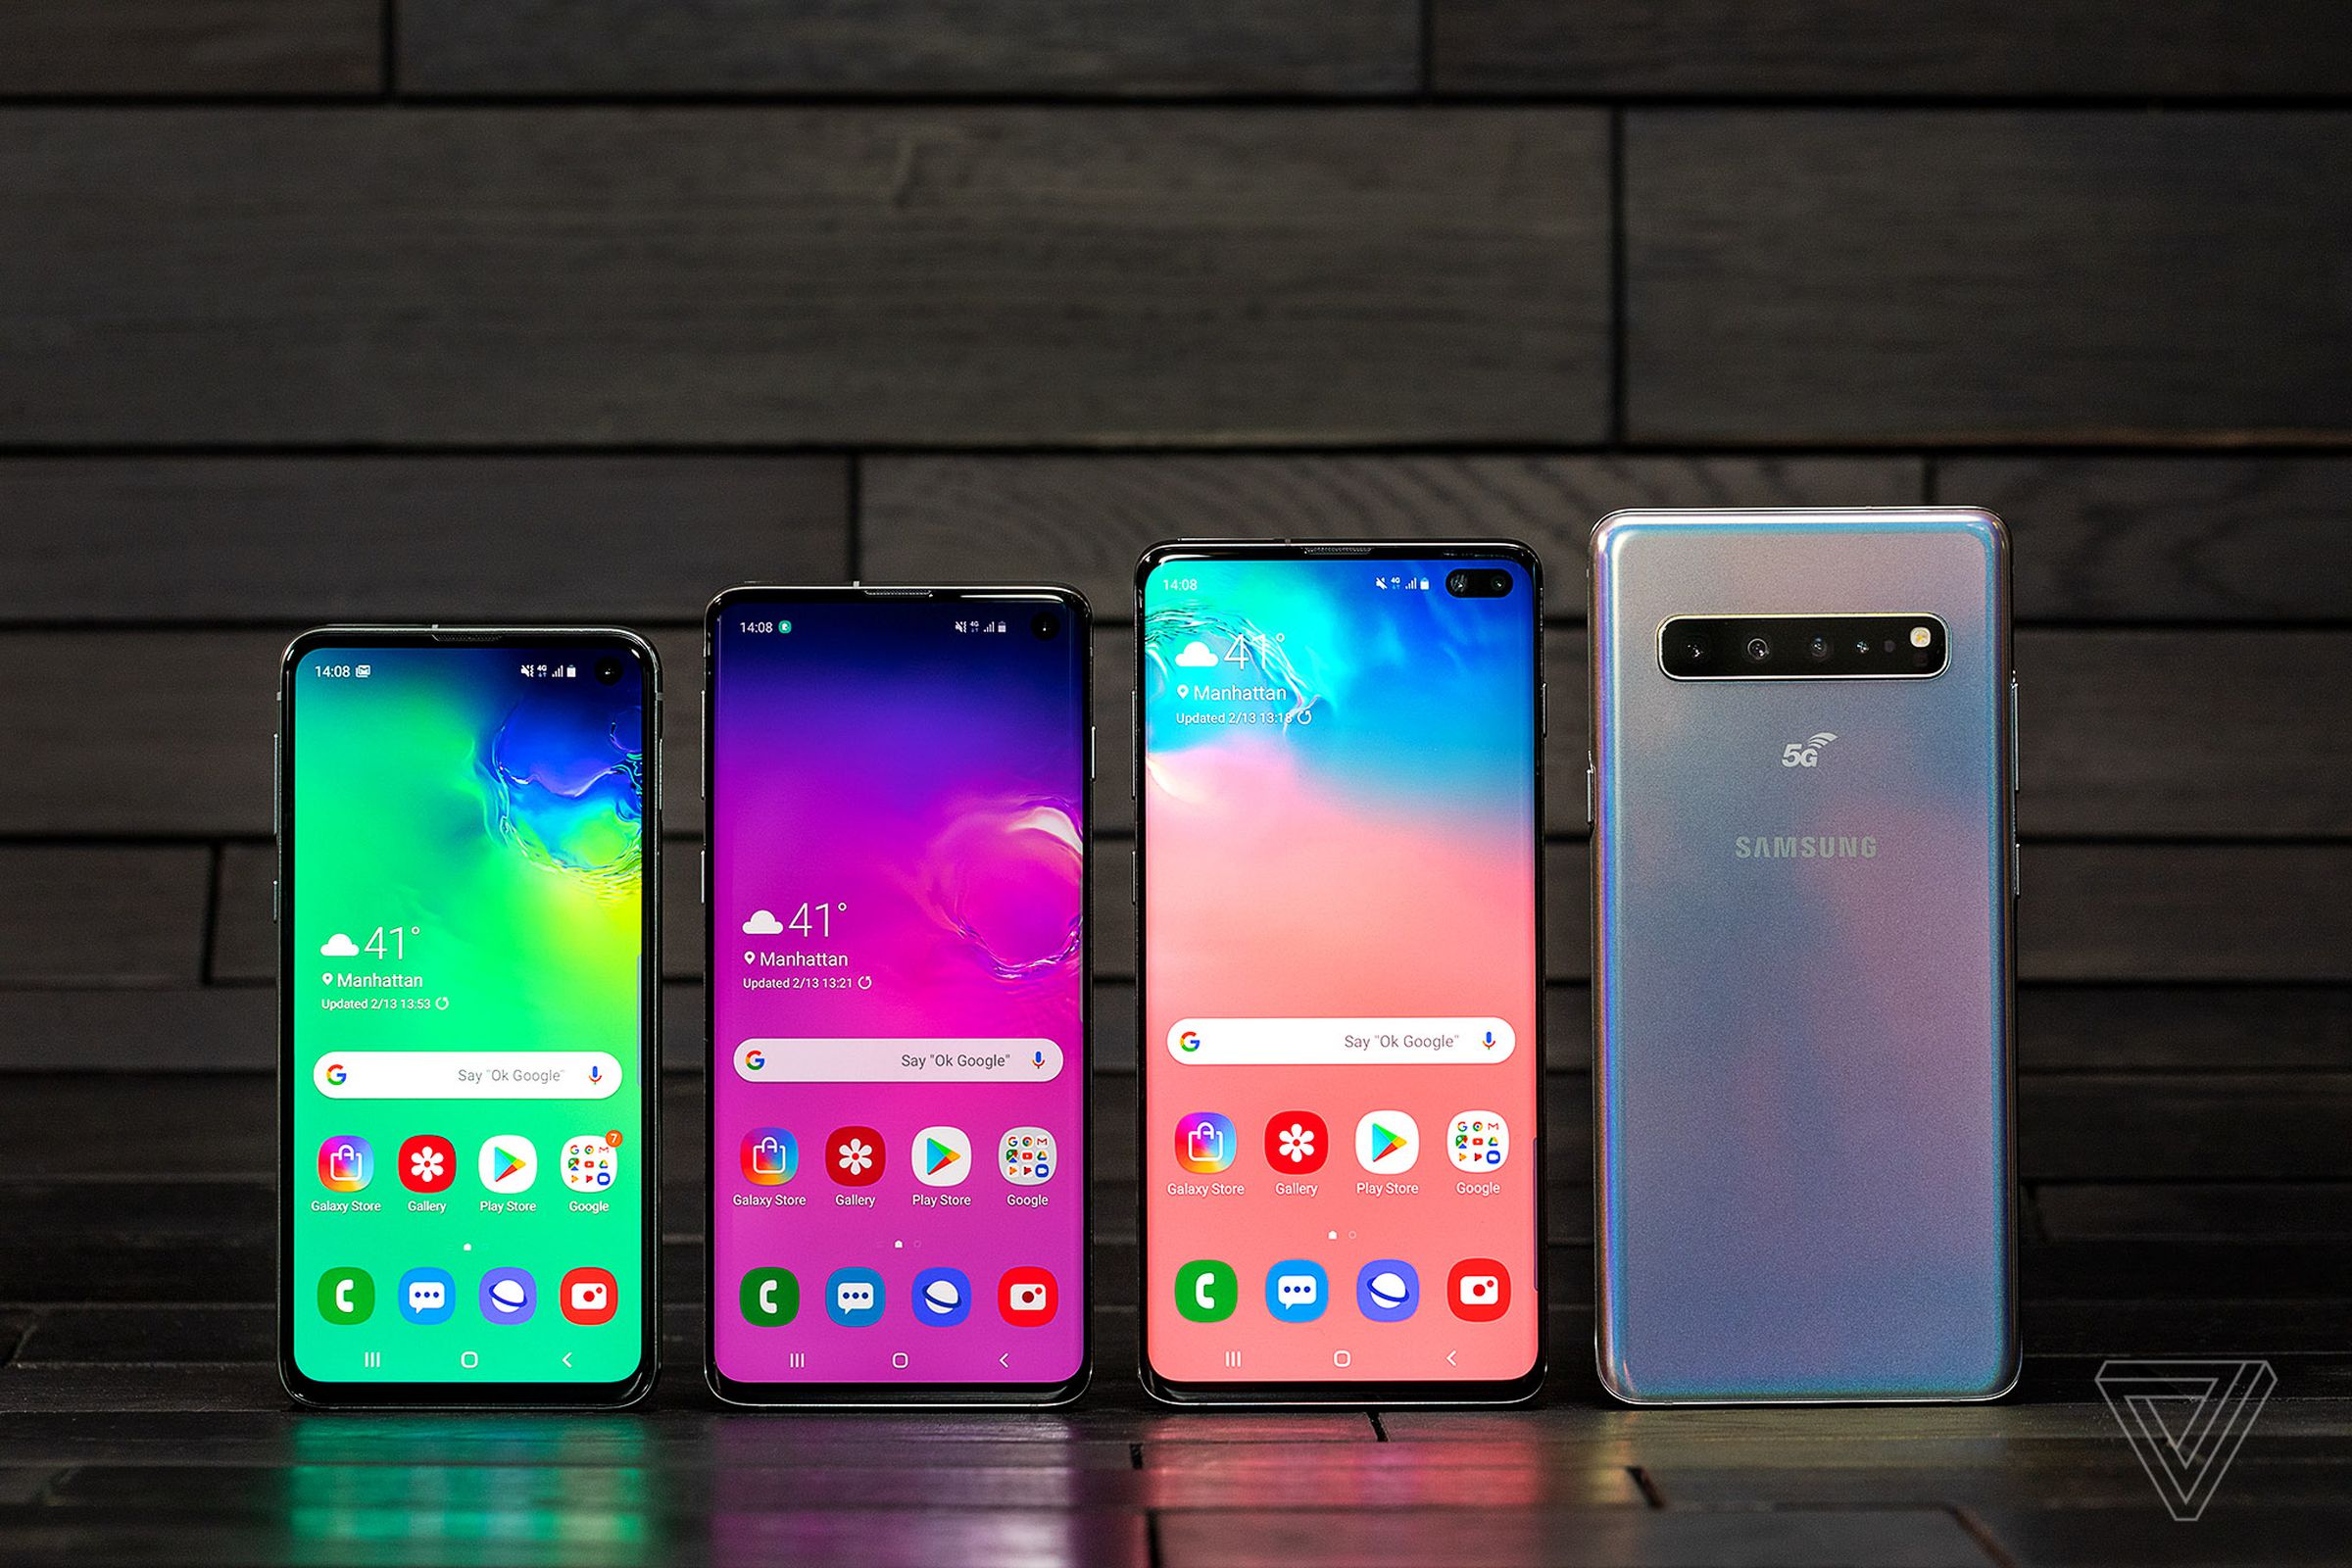 The full Galaxy S10 lineup, from left to right: S10E, S10, S10 Plus, and S10 5G